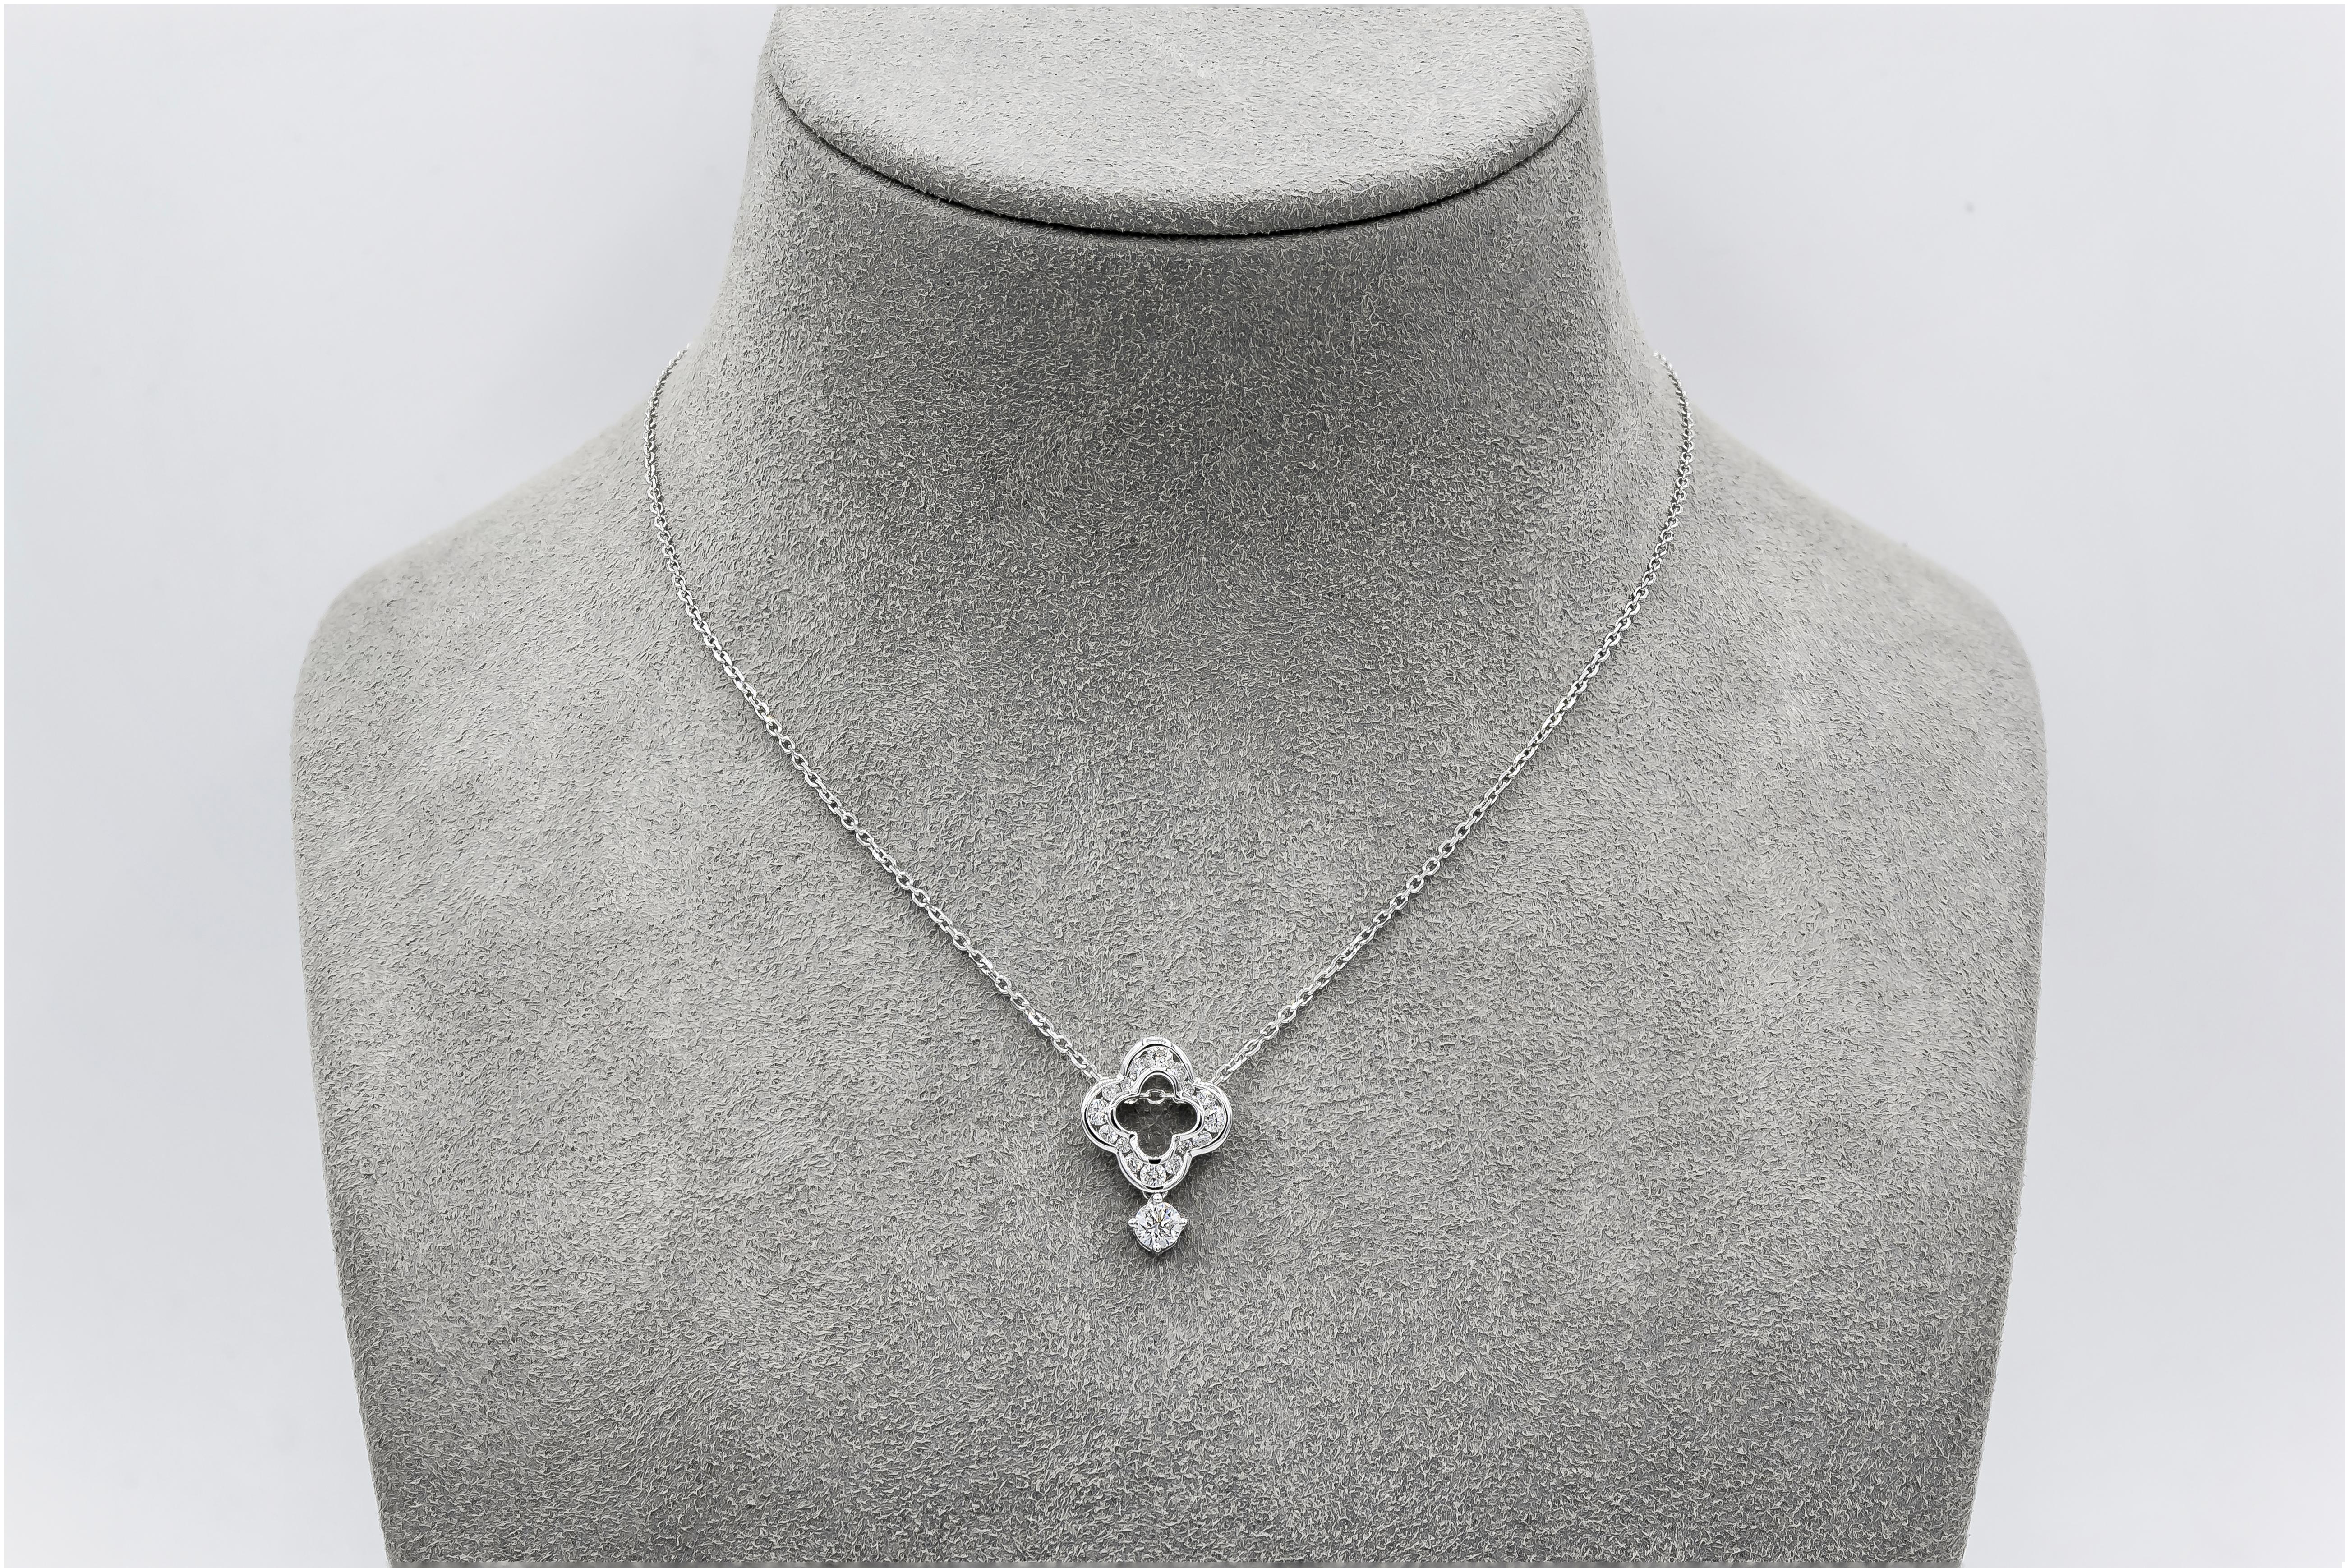 A stylish pendant necklace showcasing an open-work four point clover design, channel set with round brilliant diamonds weighing 0.35 carats total. Dangling the open-work design is a single round diamond weighing 0.22 carats total. Suspended on an 18